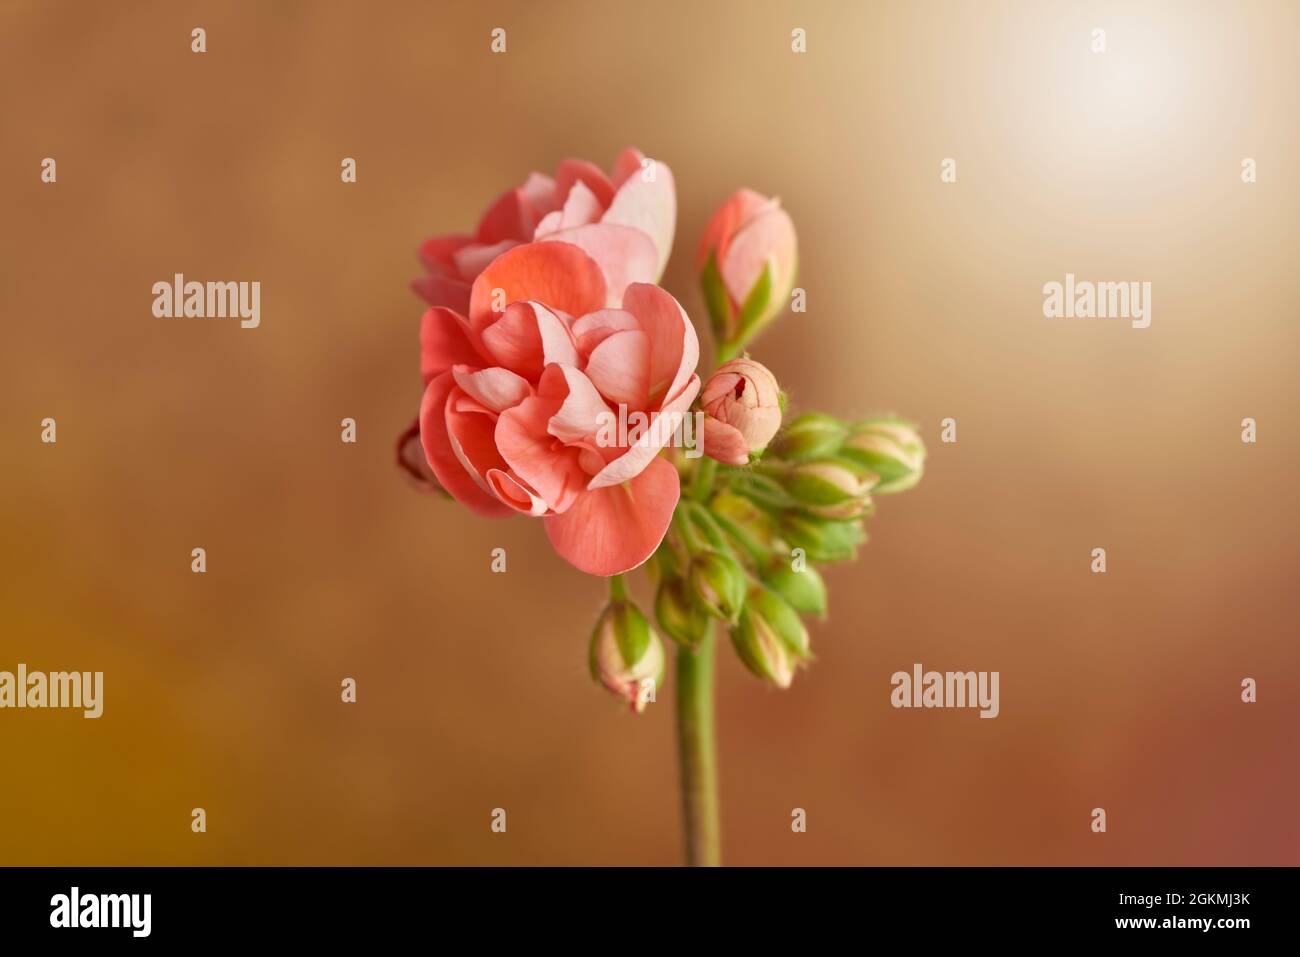 set of decorative pink flowers and buds on orange background. Spain Stock Photo